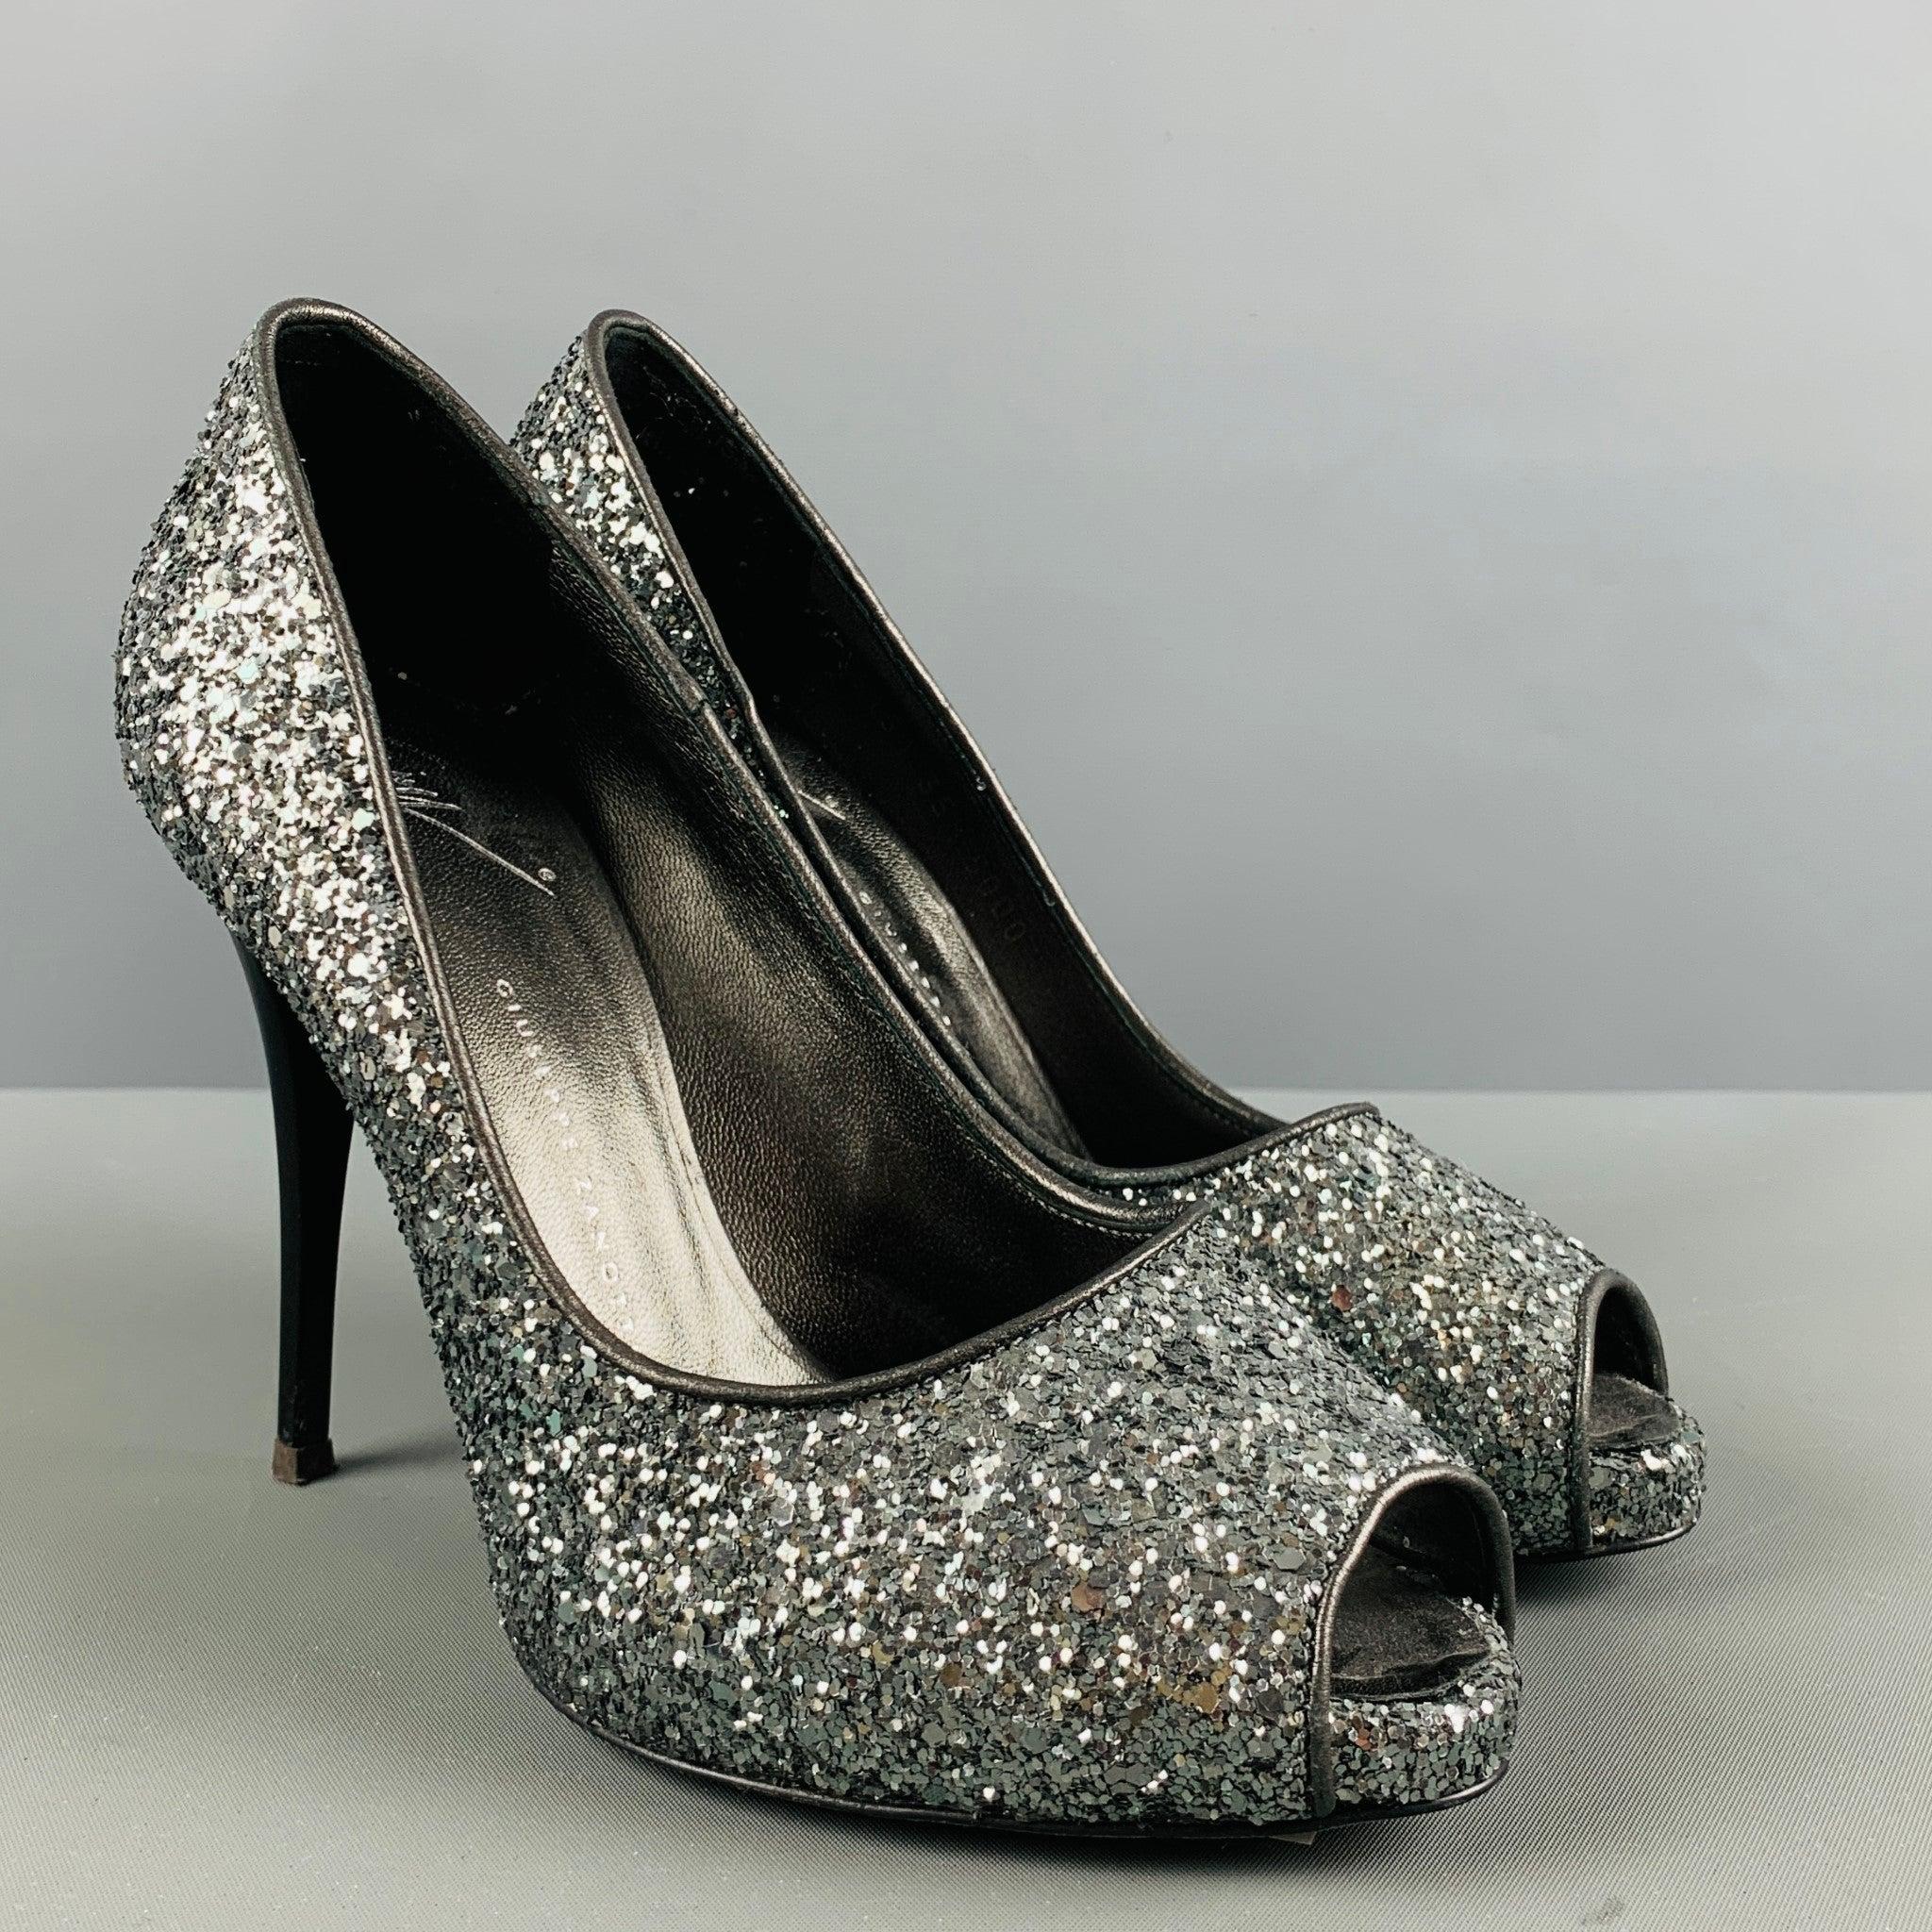 GIUSEPPE ZANOTTI pumps comes in a silver glitter material featuring an open toe, stone encrusted look, stiletto heels. Made in Italy.Very Good Pre-Owned Condition. 

Marked:   0651 35 1/2 5000 

Measurements: 
  Heel: 4.25 inches Platform: 0.5